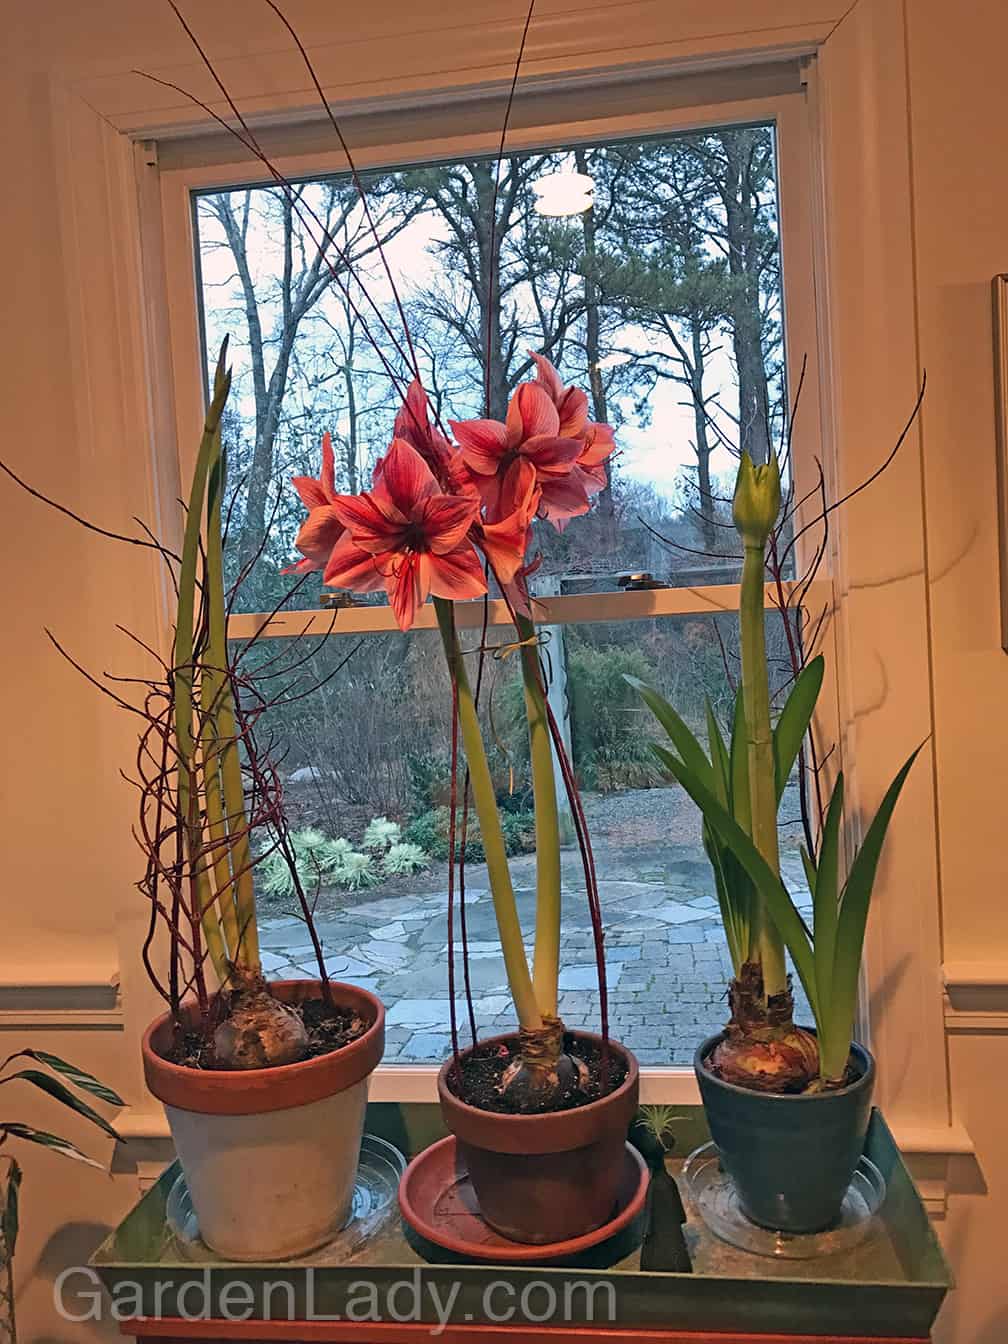 Twig Supports for Amaryllis Blooms